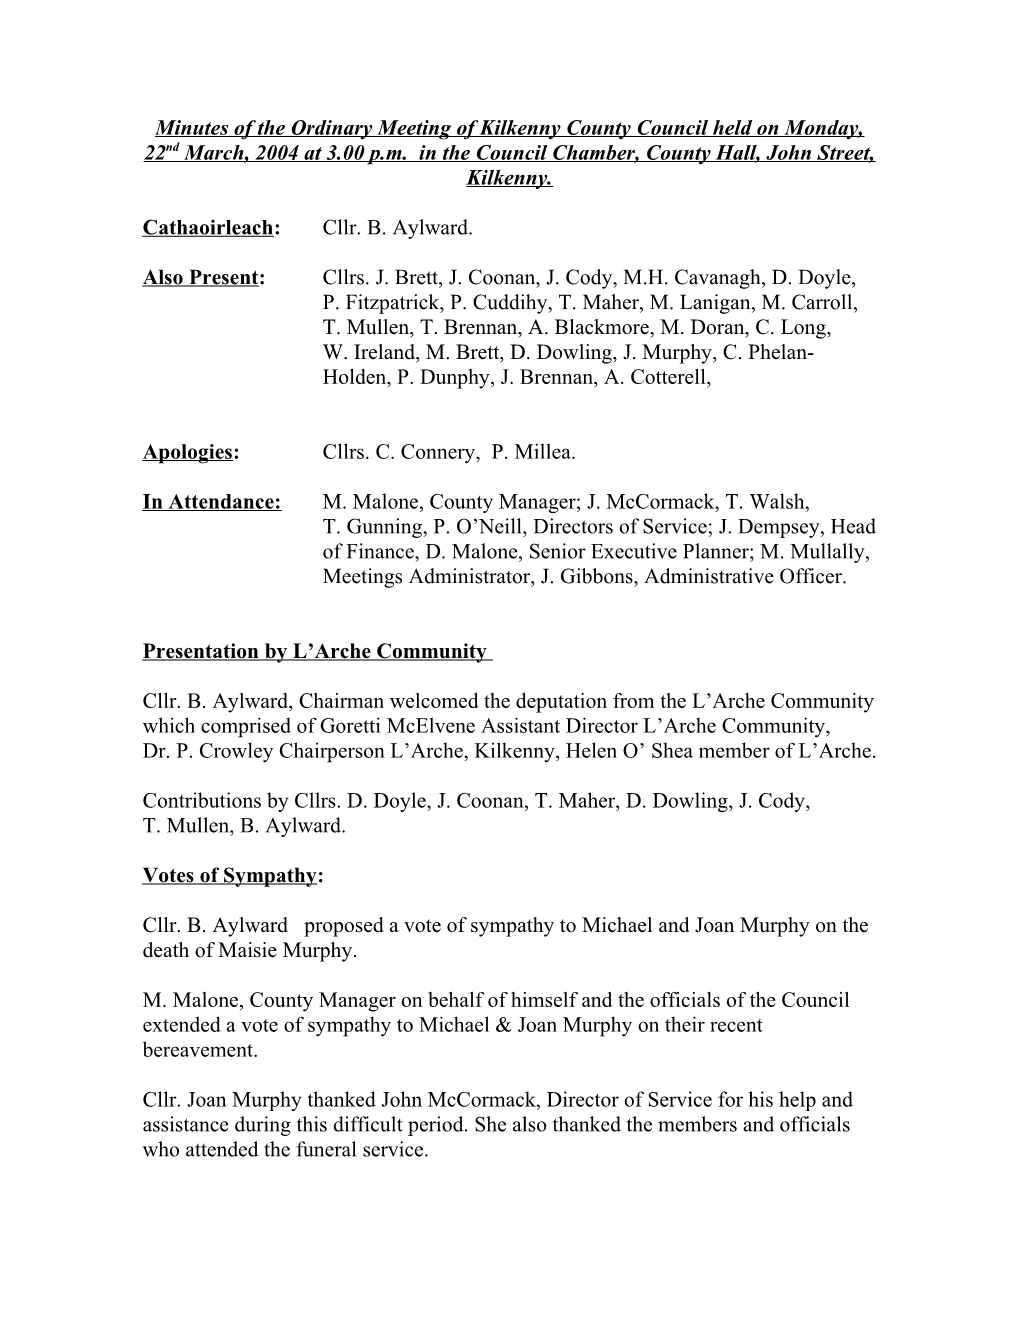 Minutes of the Ordinary Meeting of Kilkenny County Council Held on Monday, 22Nd March, 2004 at 3